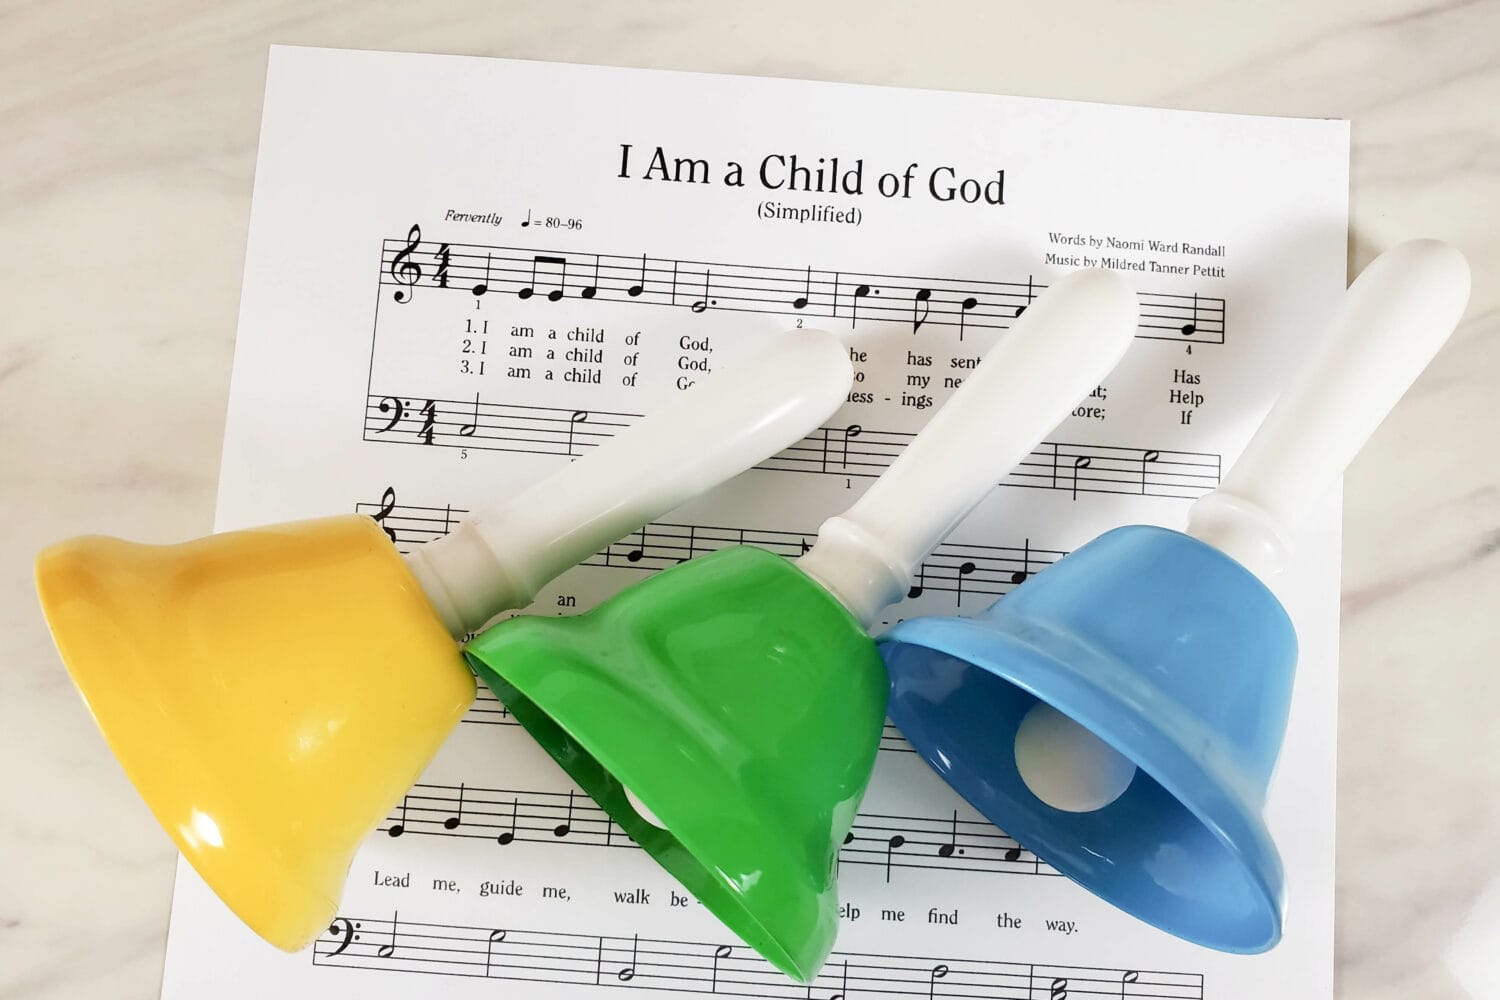 6 fun and easy ways to use "I Can Play It" simplified Primary songs sheet music! Incorporate more activities with the senior primary children learning to play the beautiful Primary music at home or at church. Ideas for LDS Primary music Leaders for singing time or fun at home challenges for the kids.